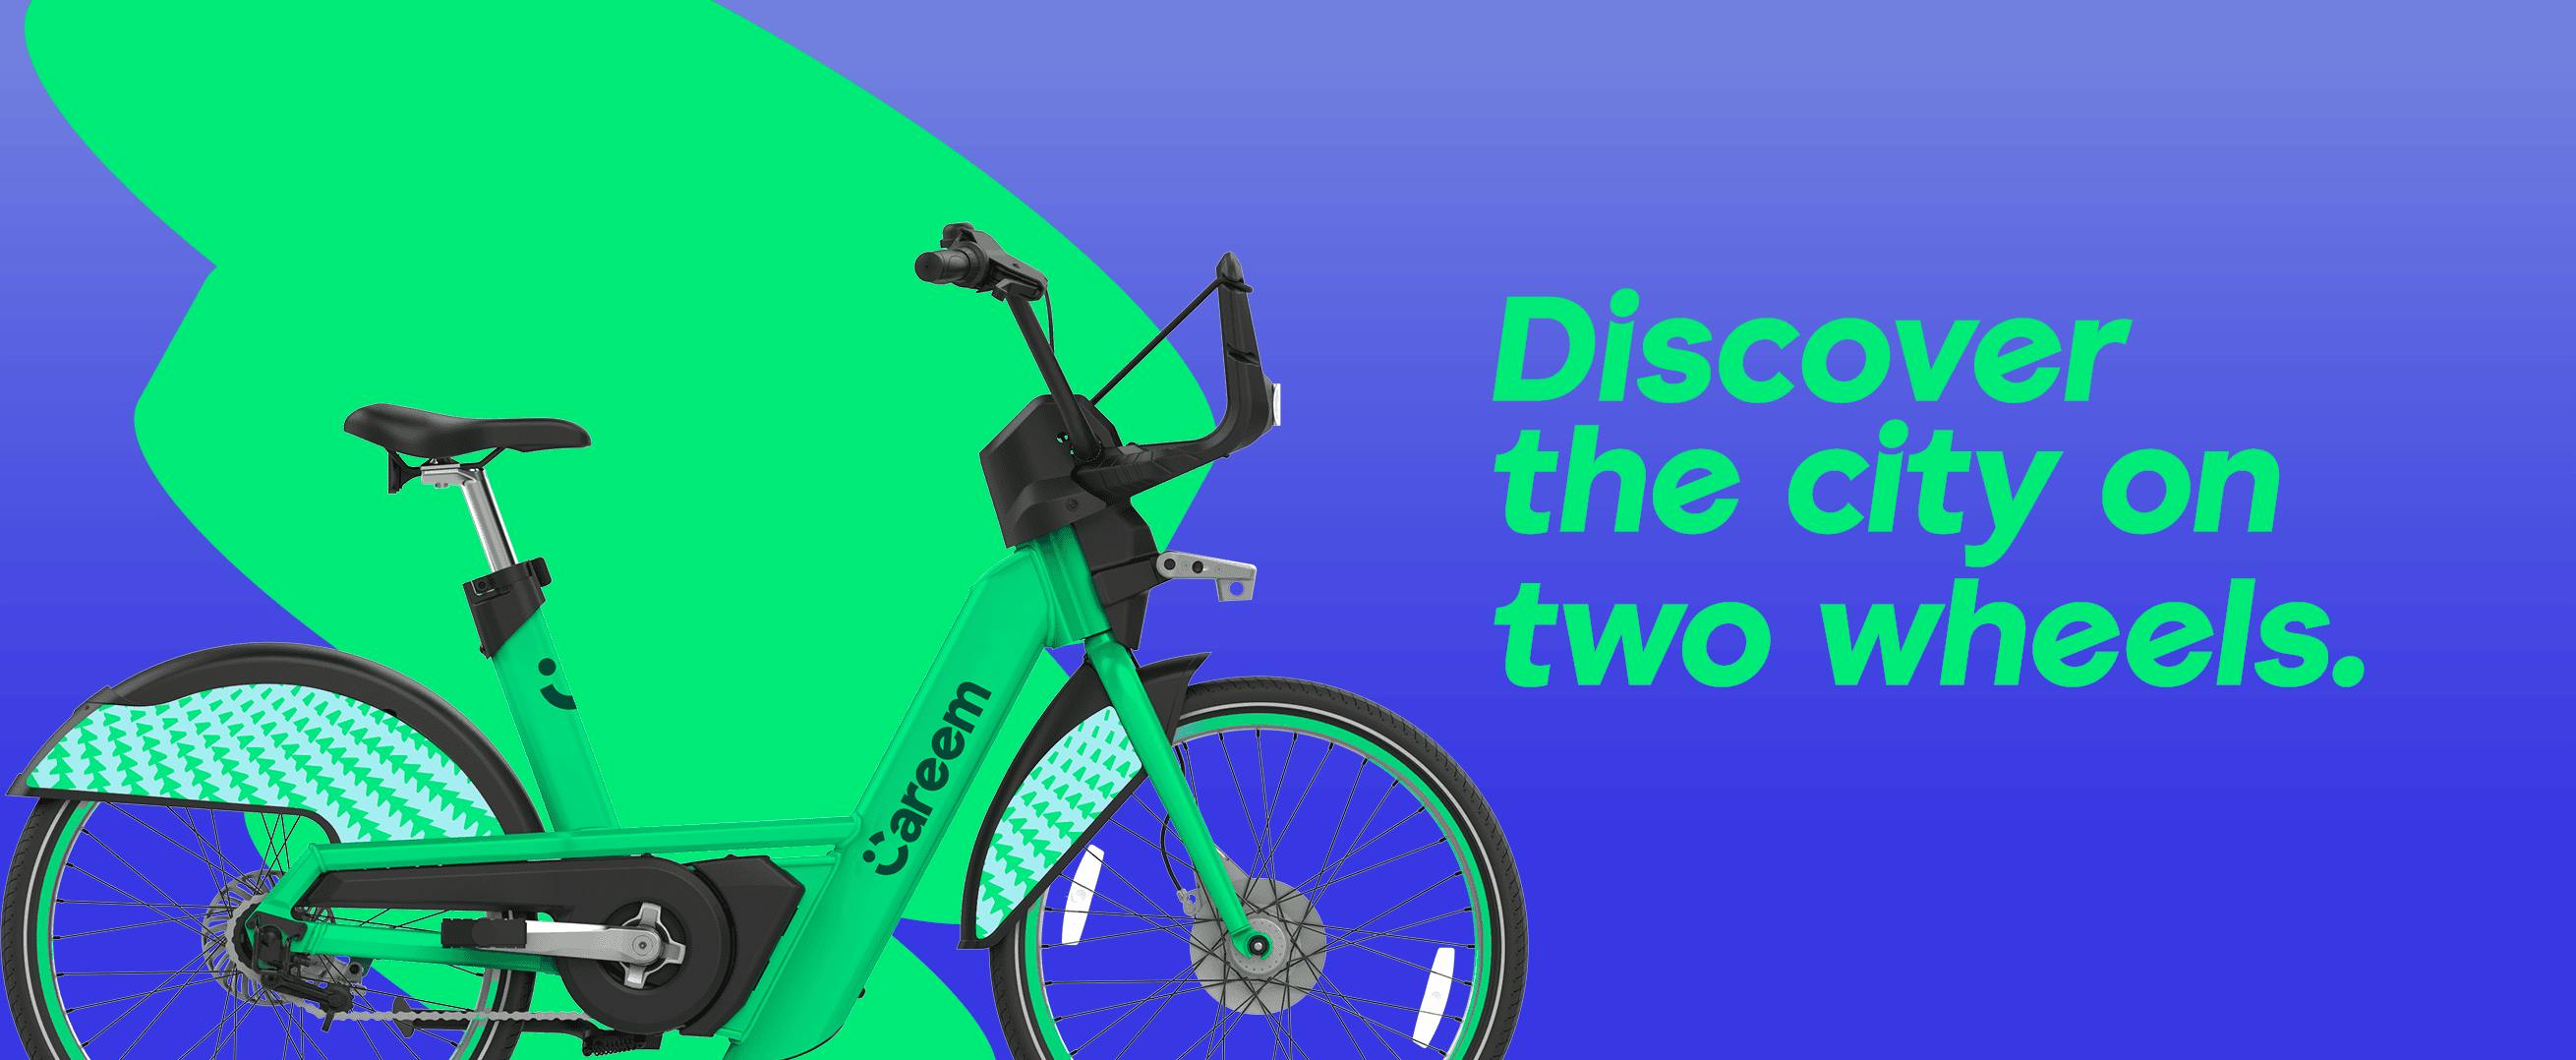 Discover city on two wheels